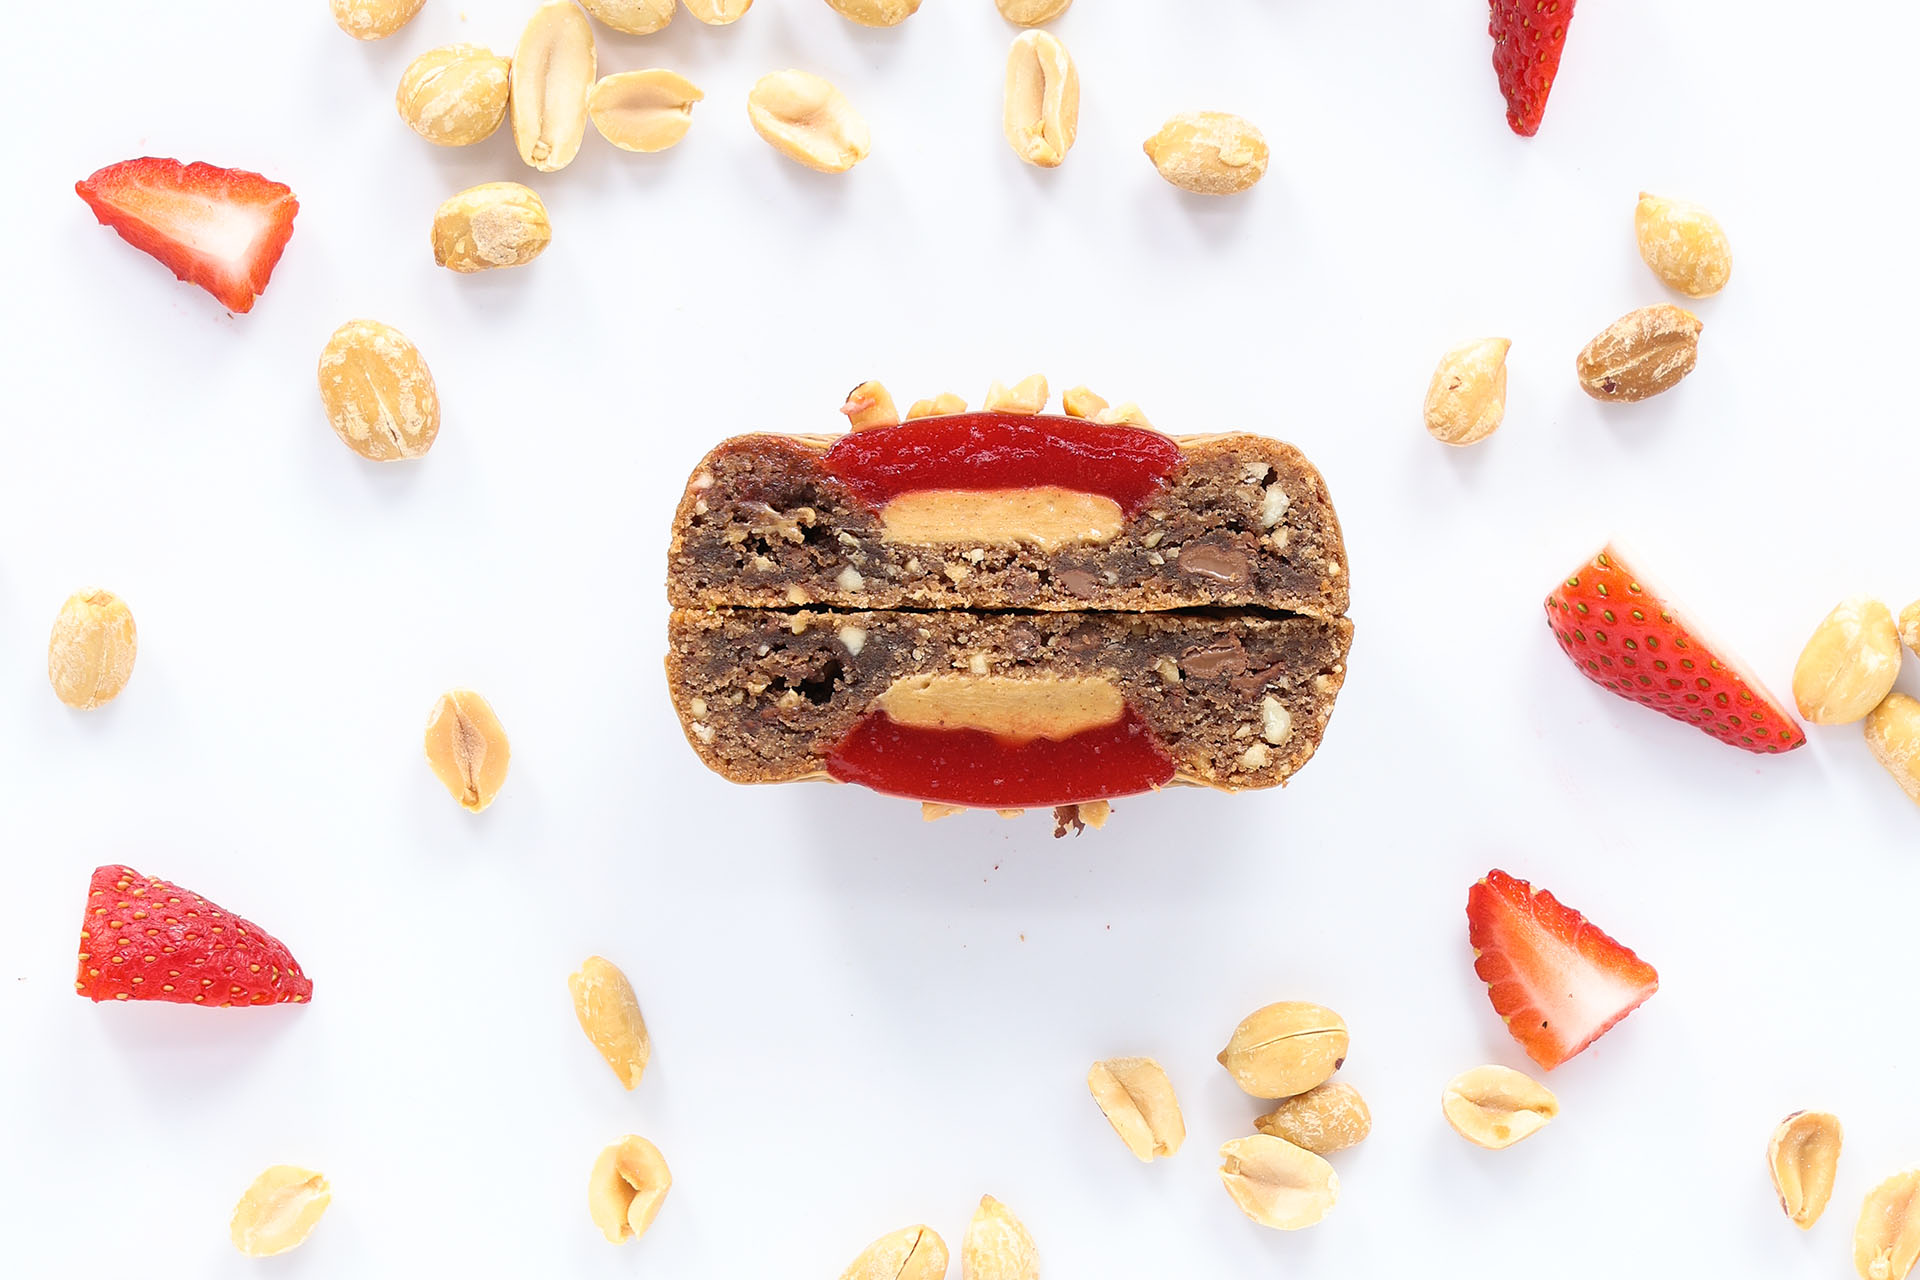 A cross-section of a layered dessert bar with a peanut and espresso strawberry topping on a white surface.